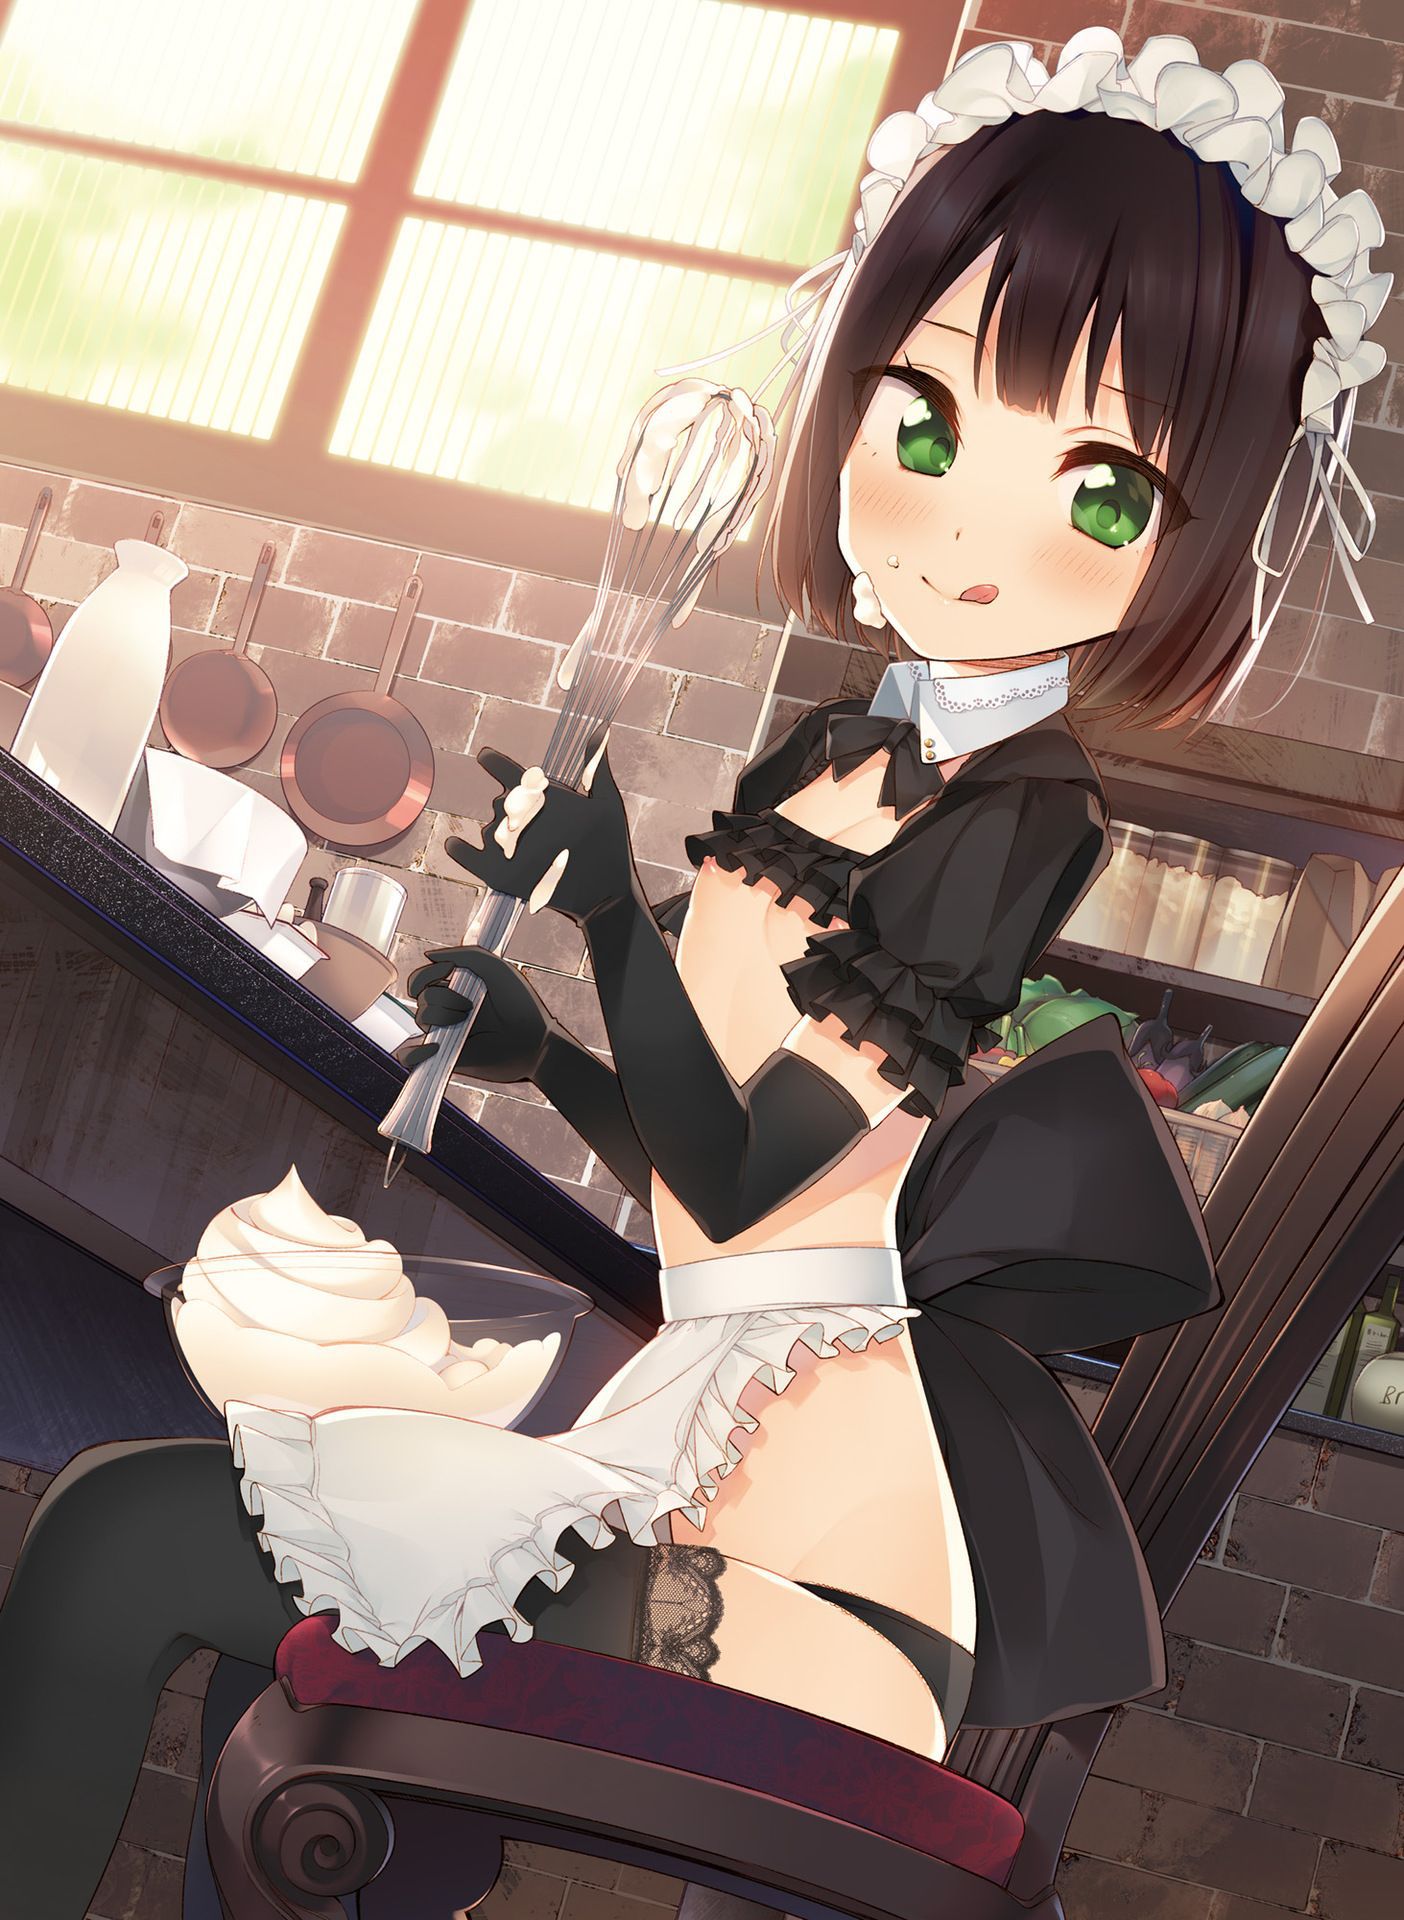 A cute two-dimensional erotic image of a poor milk loli girl for ladies and gentlemen who likes to be a little 56